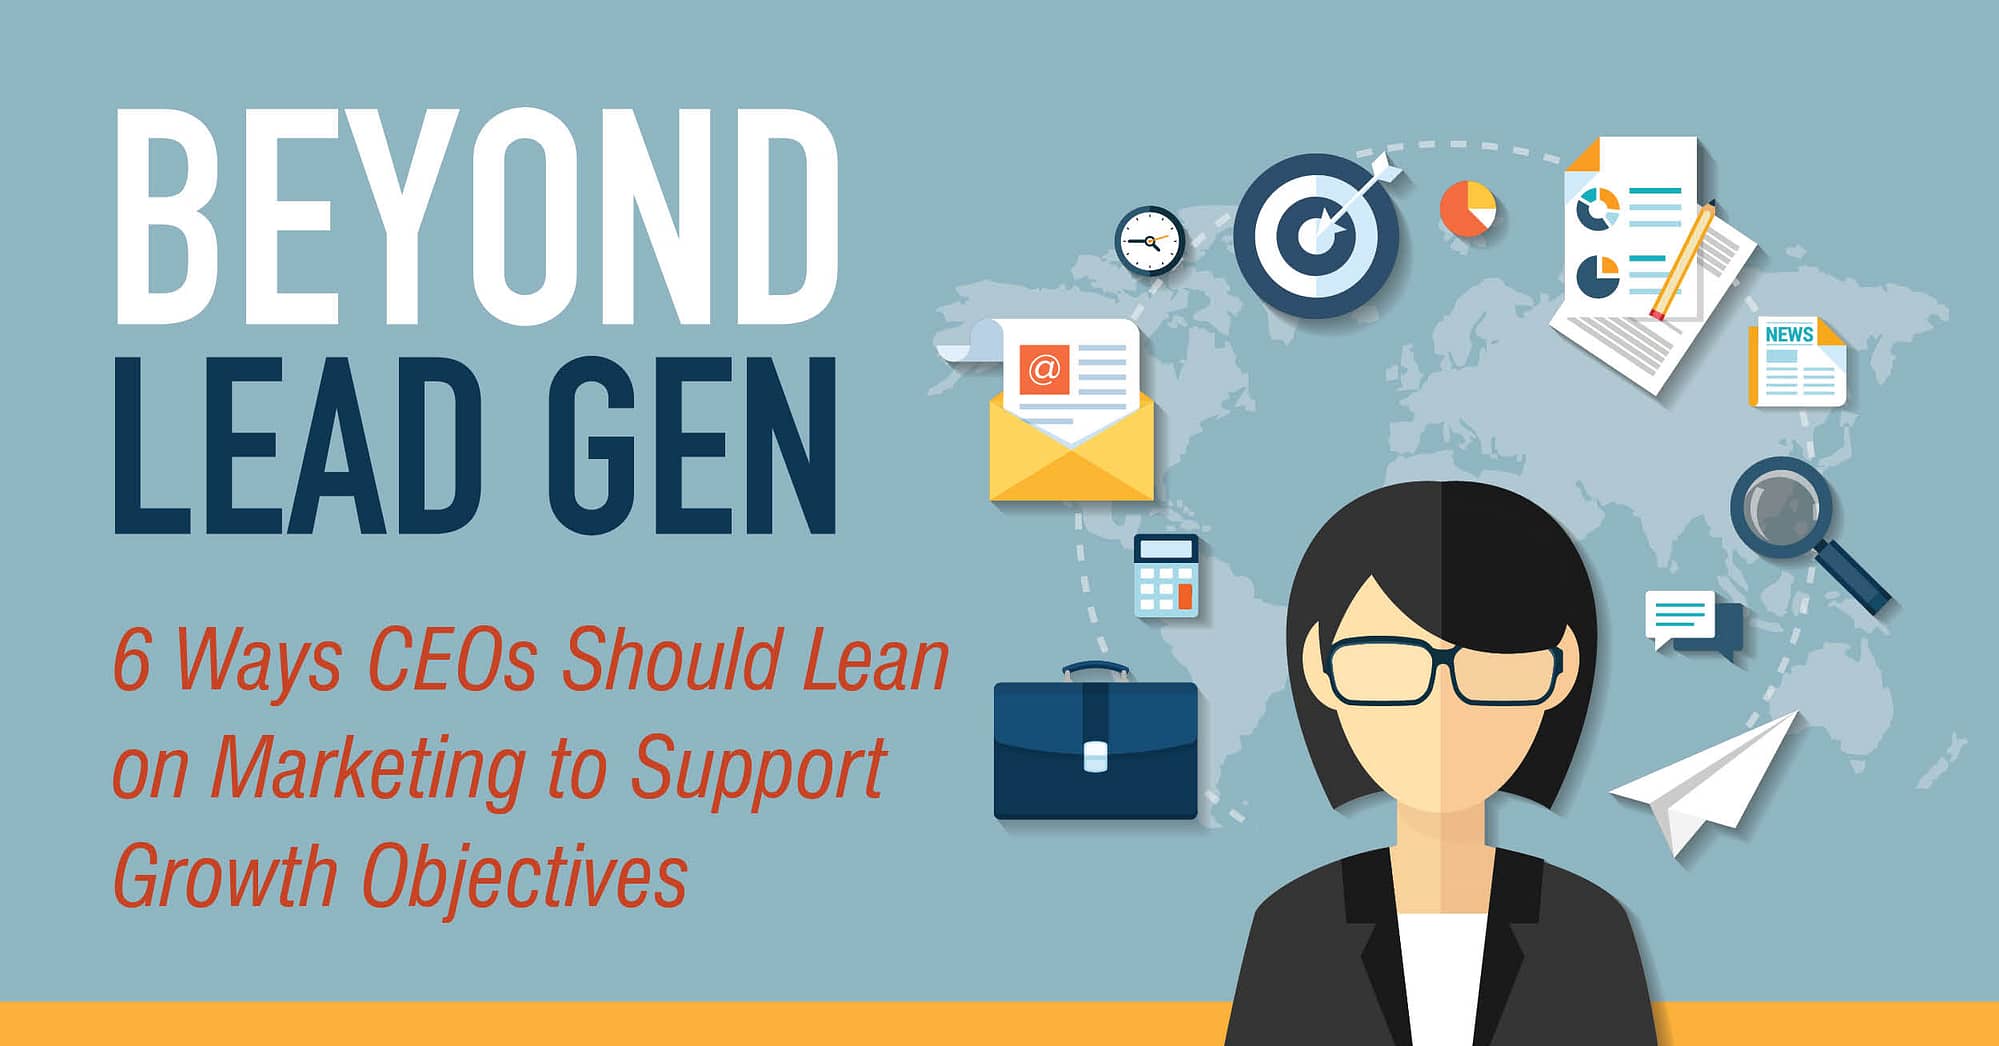 Beyond Lead Gen: 6 Ways CEOs Should Lean on Marketing to Support Growth Objectives